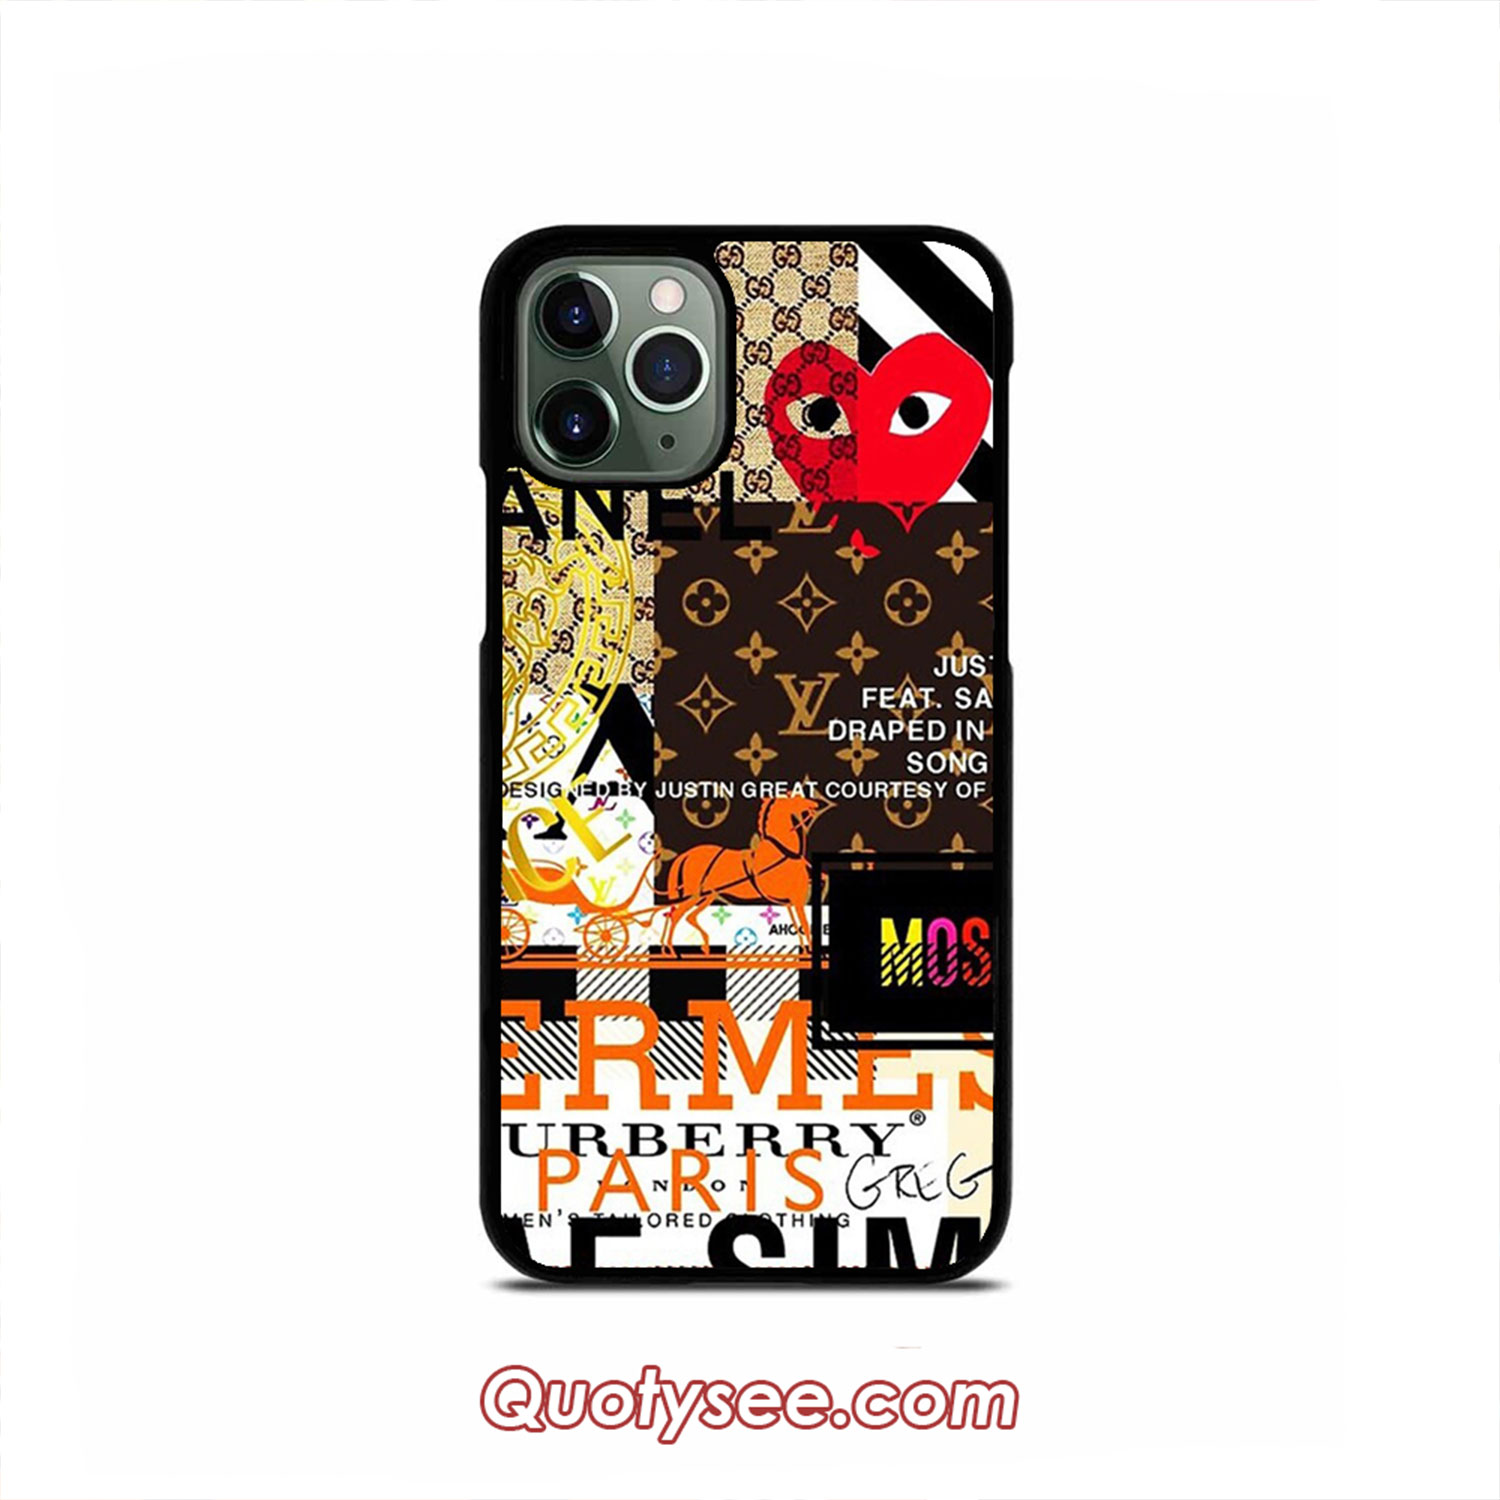 Fashion Collage Iphone Case 11 11 Pro 11 Pro Max Xs Max Xr X 8 8 Plus 7 7 Plus 6 6s Quotysee Com